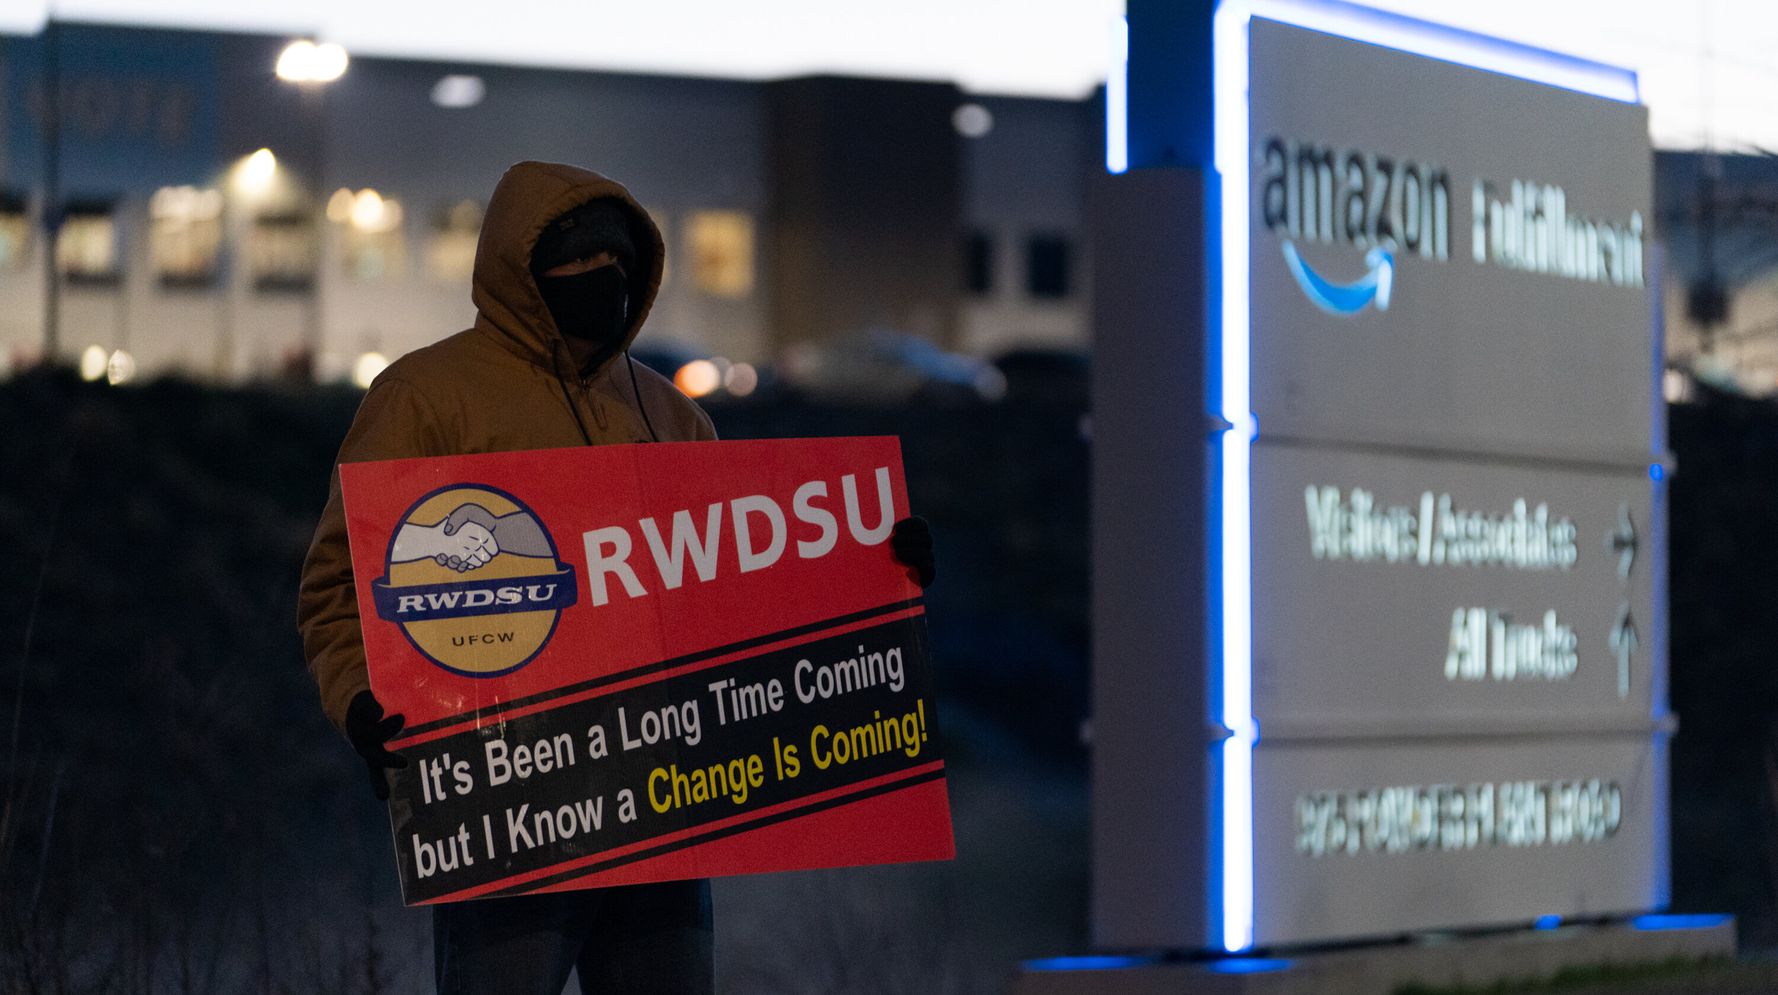 Amazon Broke Law And Should Face New Union Election, Labor Official Finds